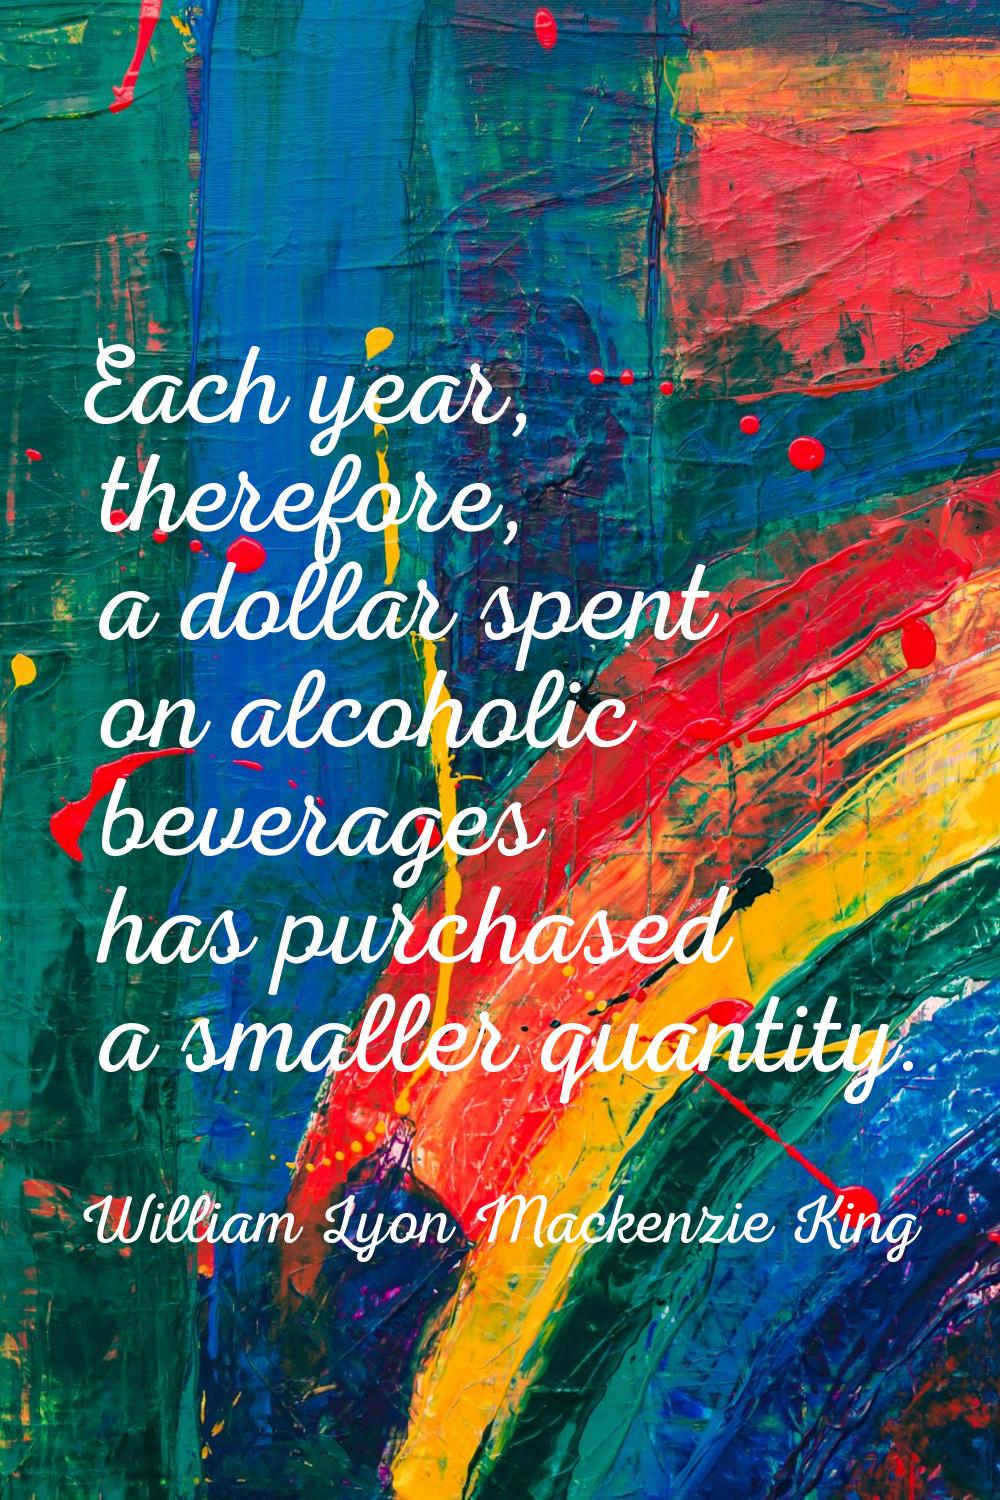 Each year, therefore, a dollar spent on alcoholic beverages has purchased a smaller quantity.